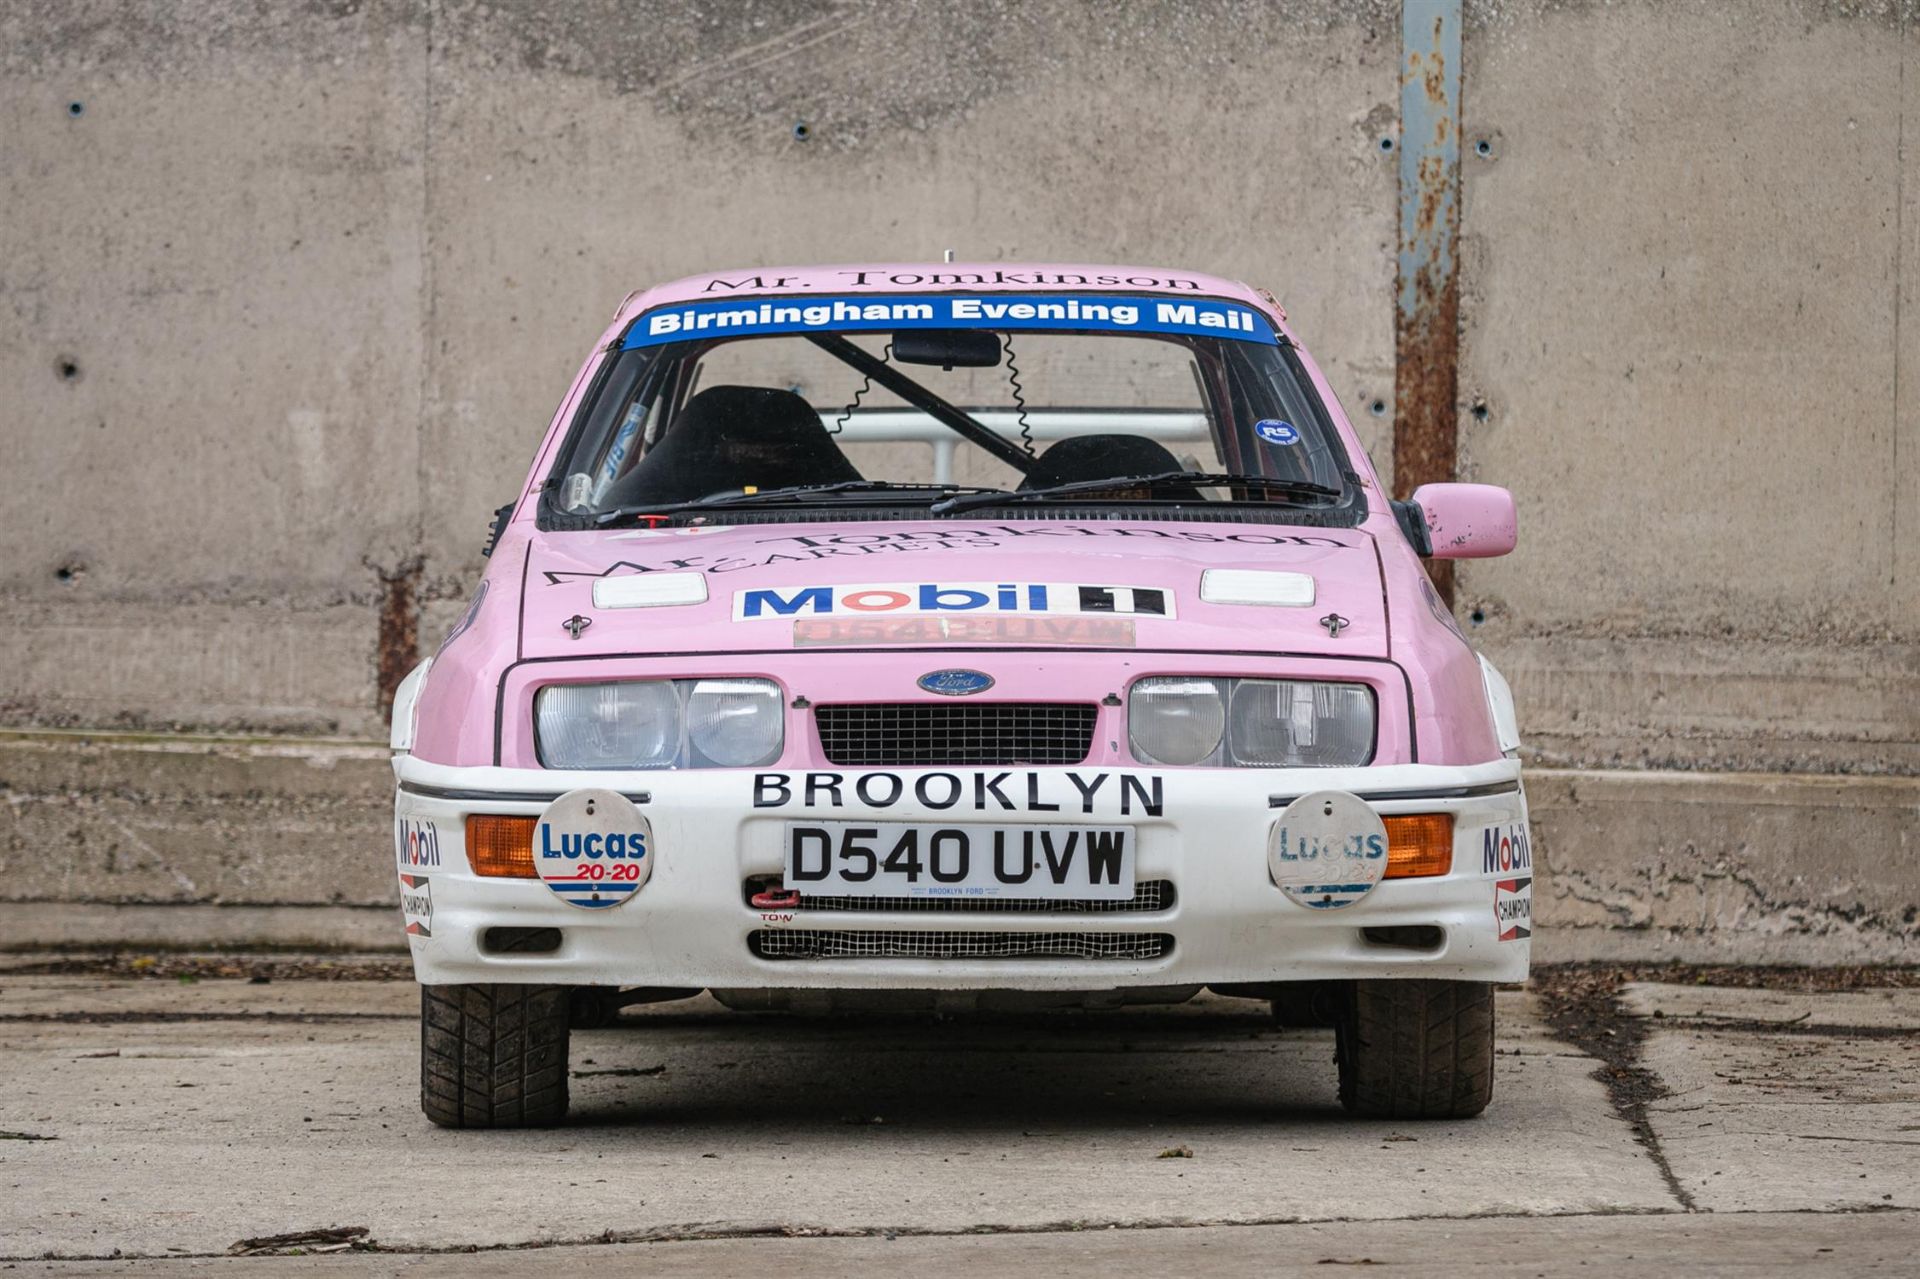 1987 Ford Sierra Cosworth ex-Works & 'Group A' Rally Car - Image 5 of 10